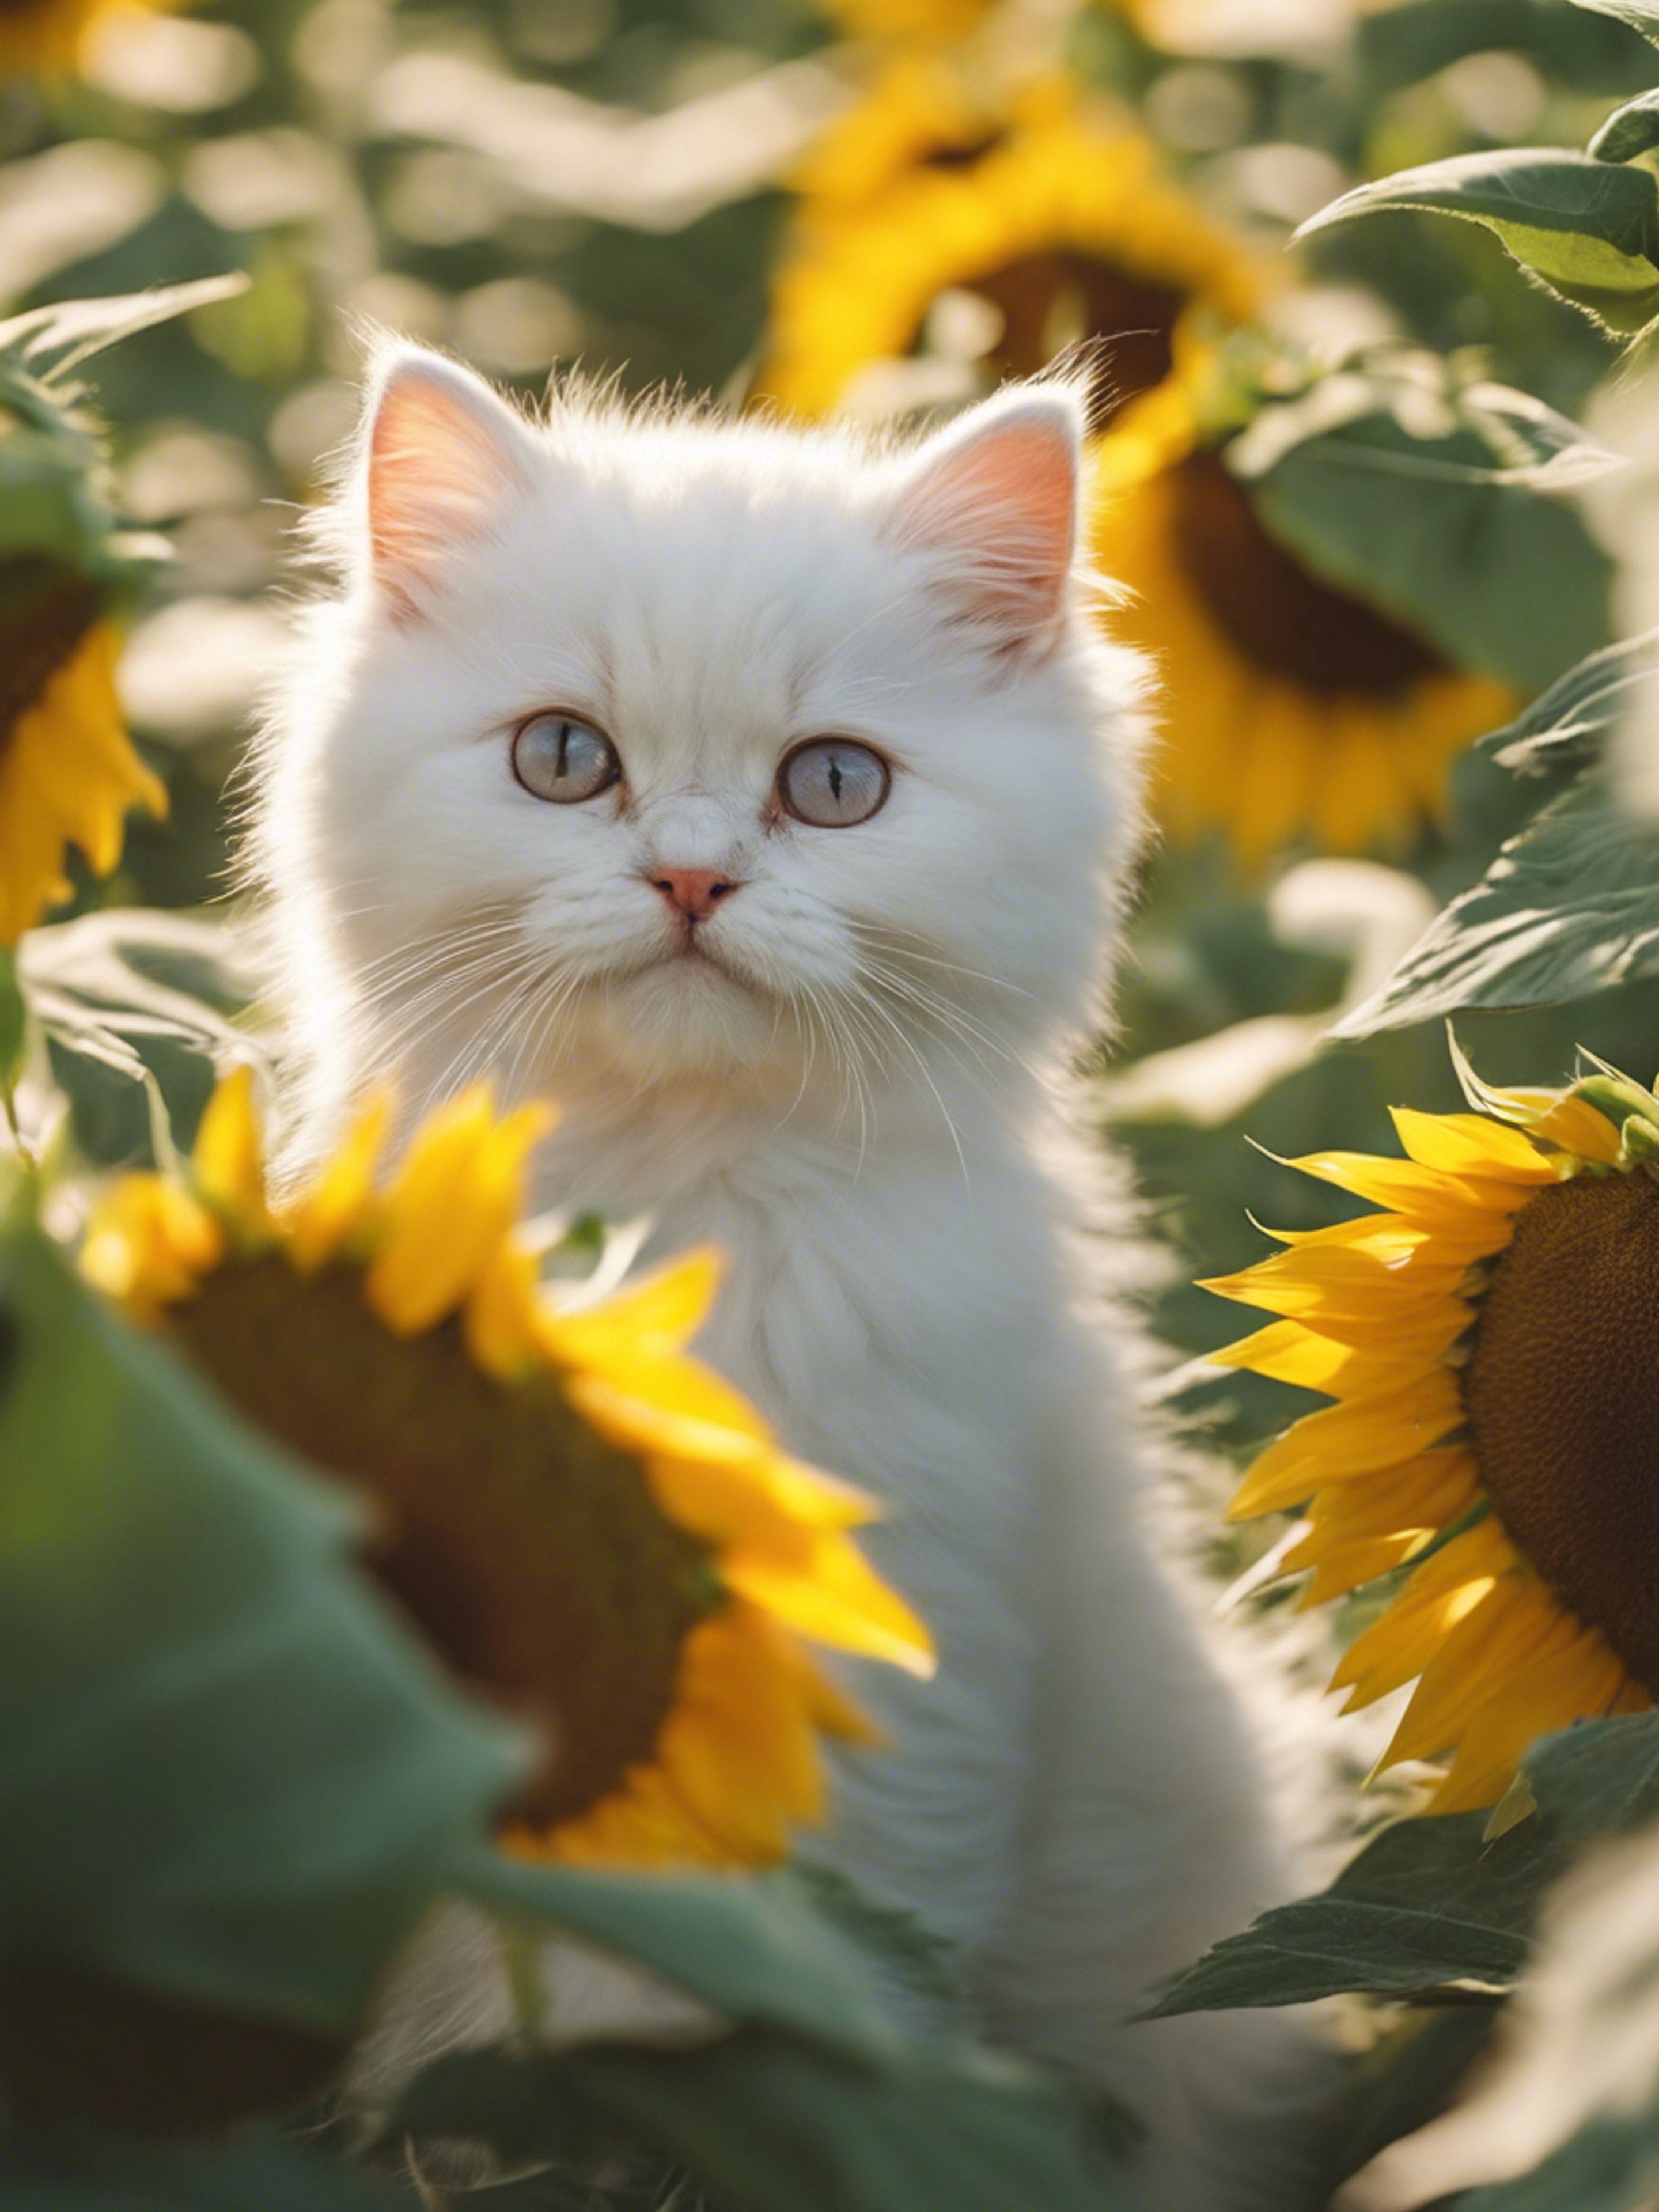 A snow-white Persian kitten playing peek-a-boo among a field of sunflowers on a bright, sunny day. טפט[783f0584fefb42ff9955]